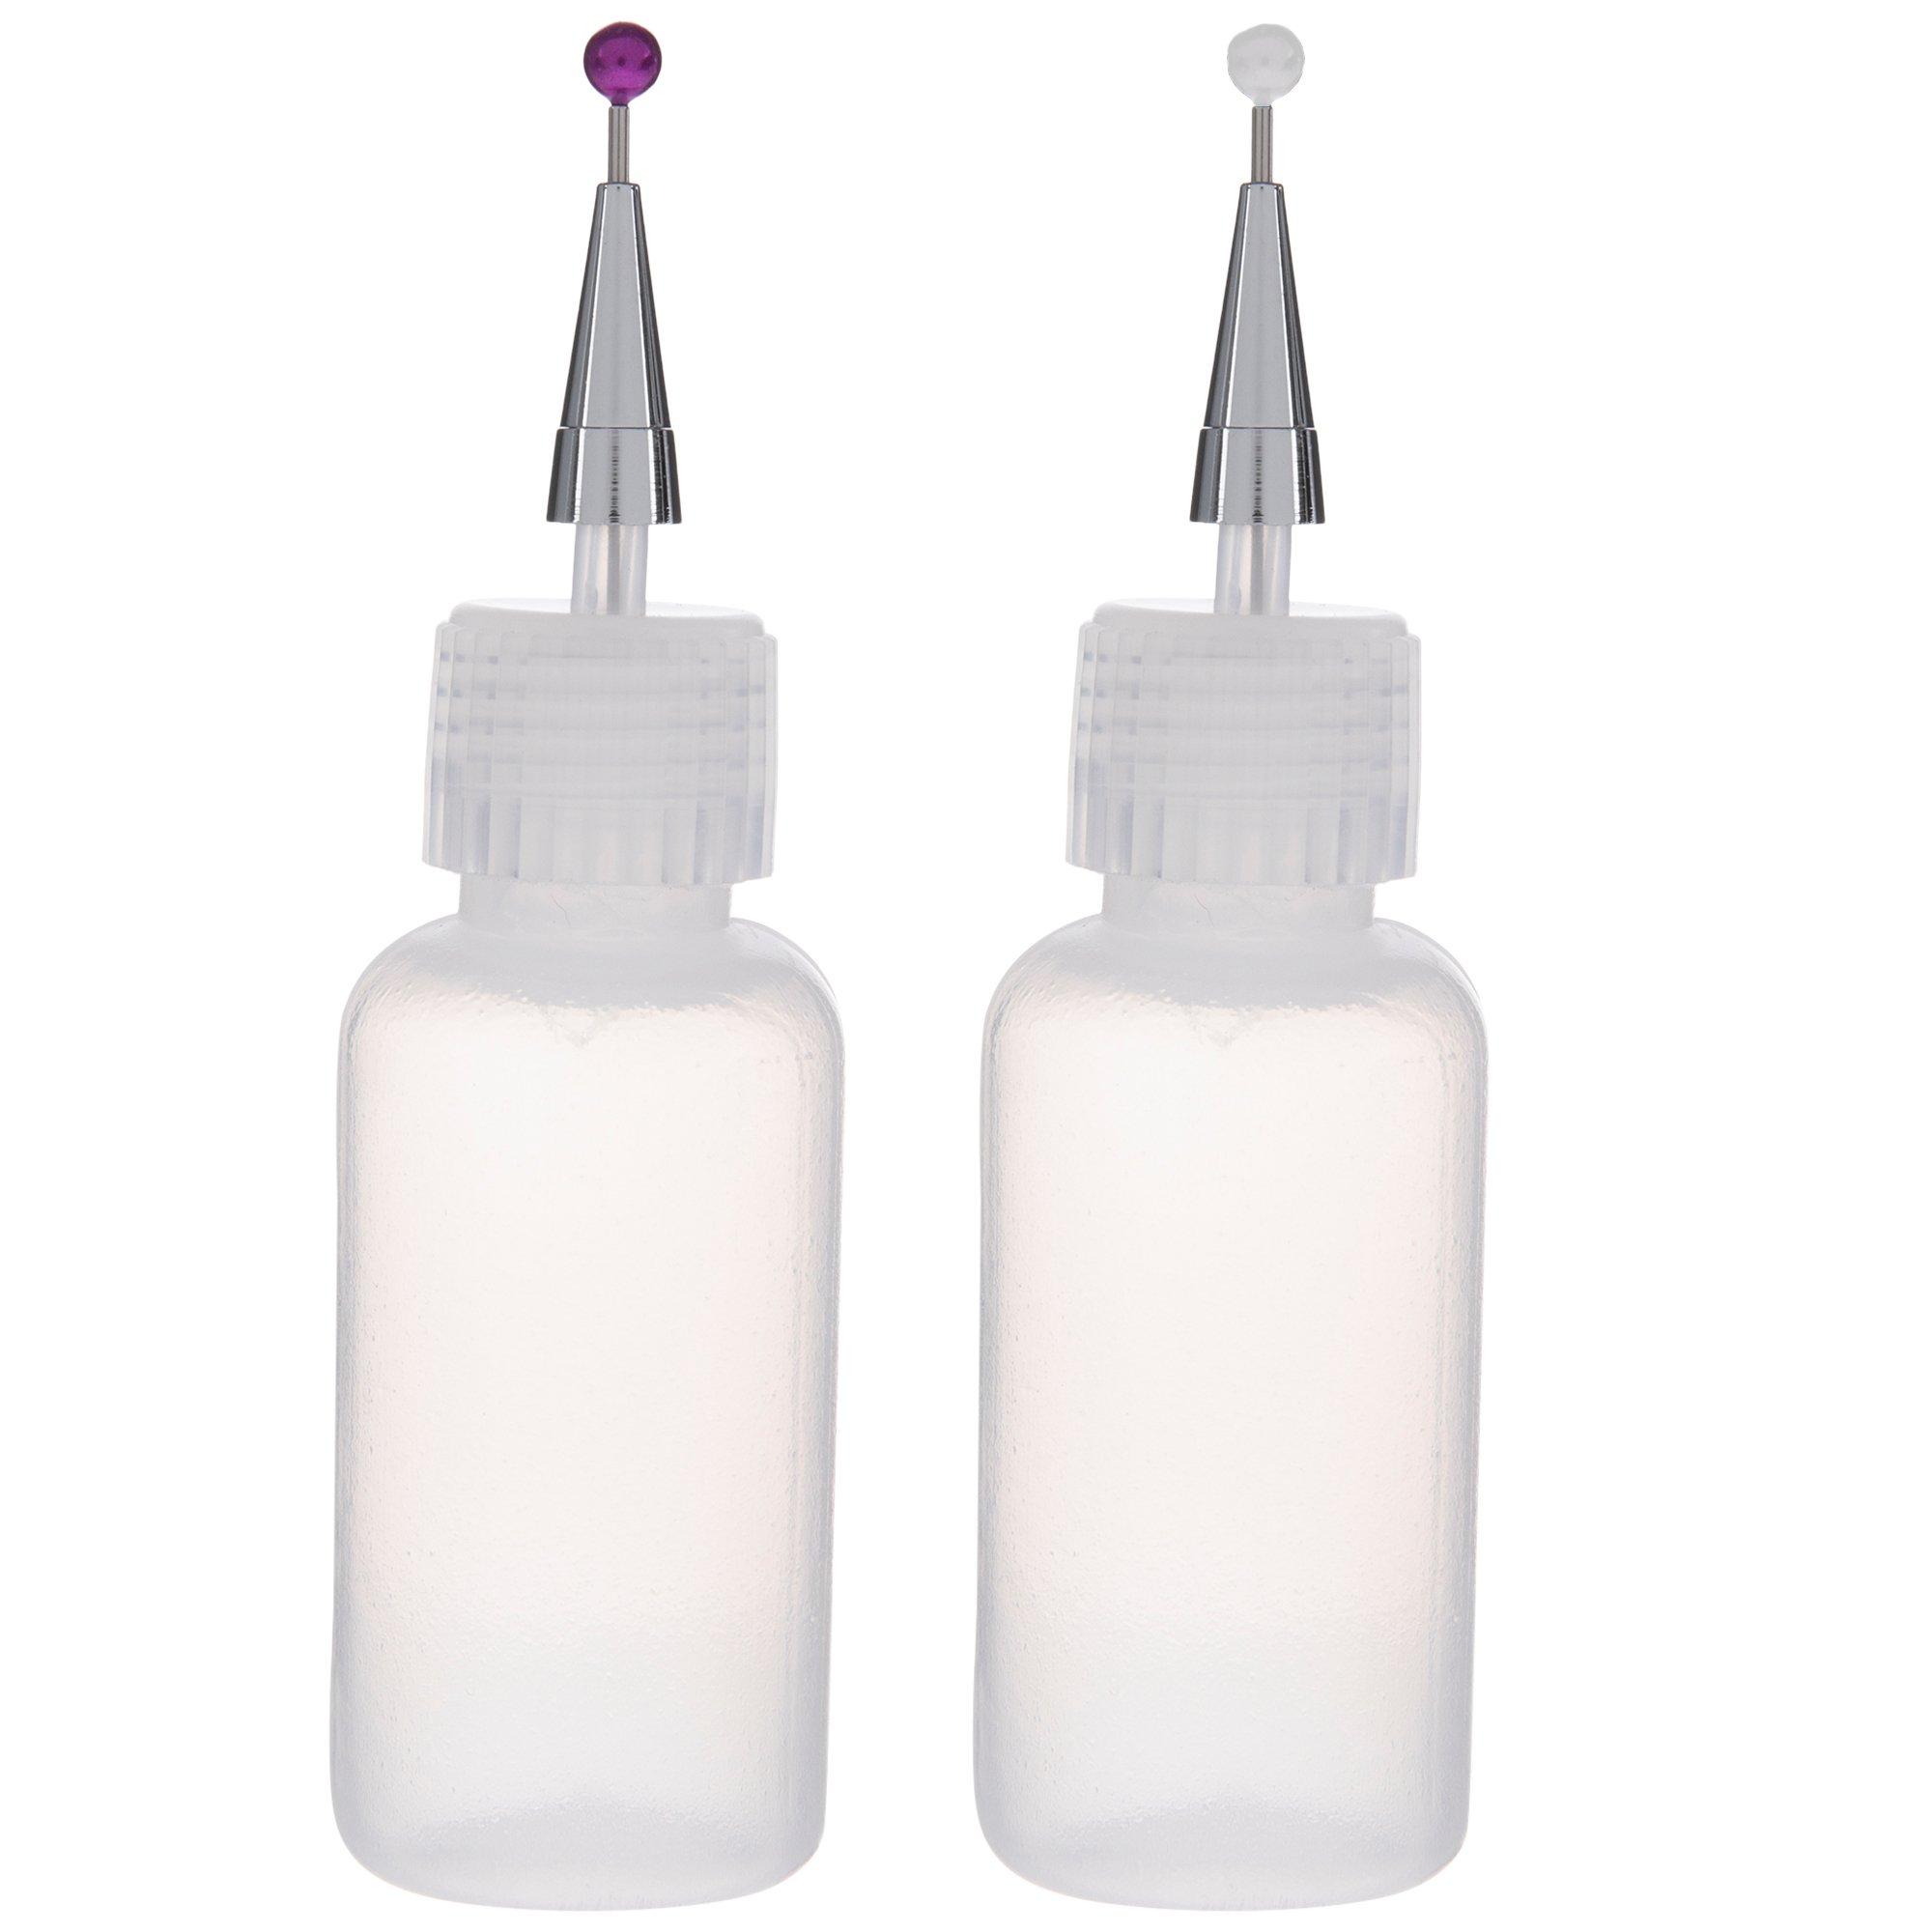 Six Pack of 30ml applicator Bottles with Cone Top